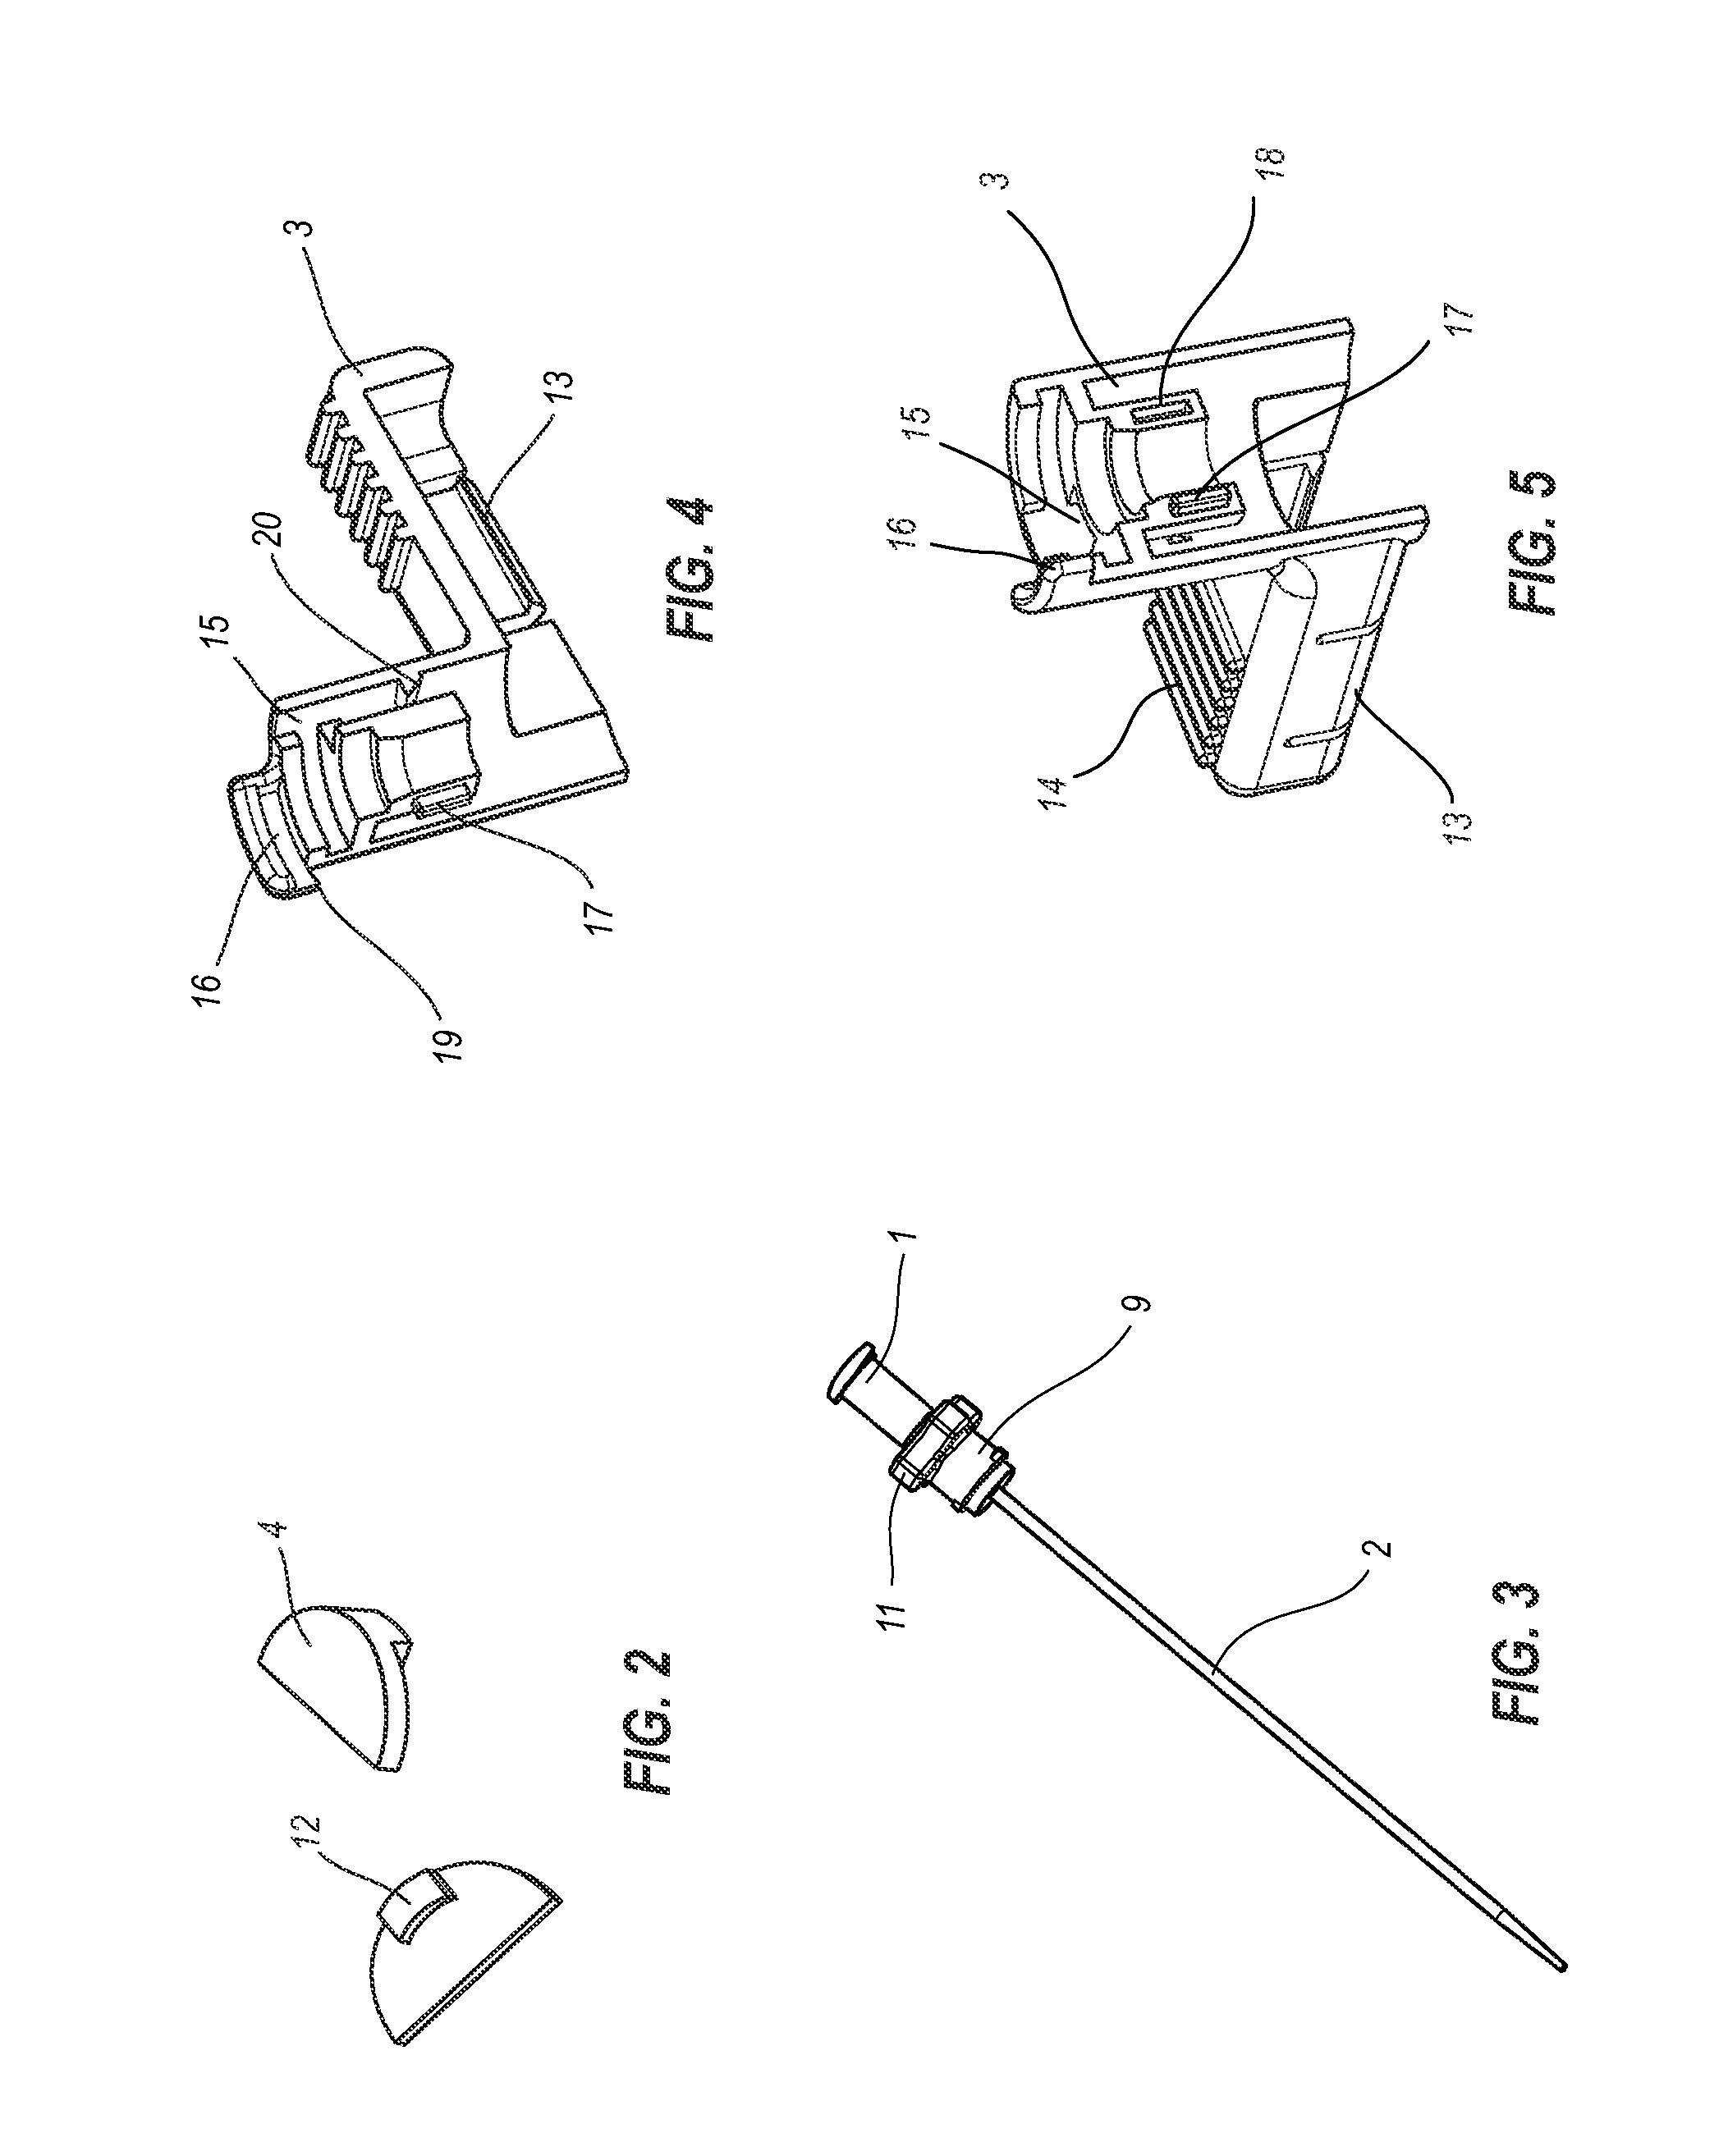 Catheter Introducer Including a Valve and Valve Actuator